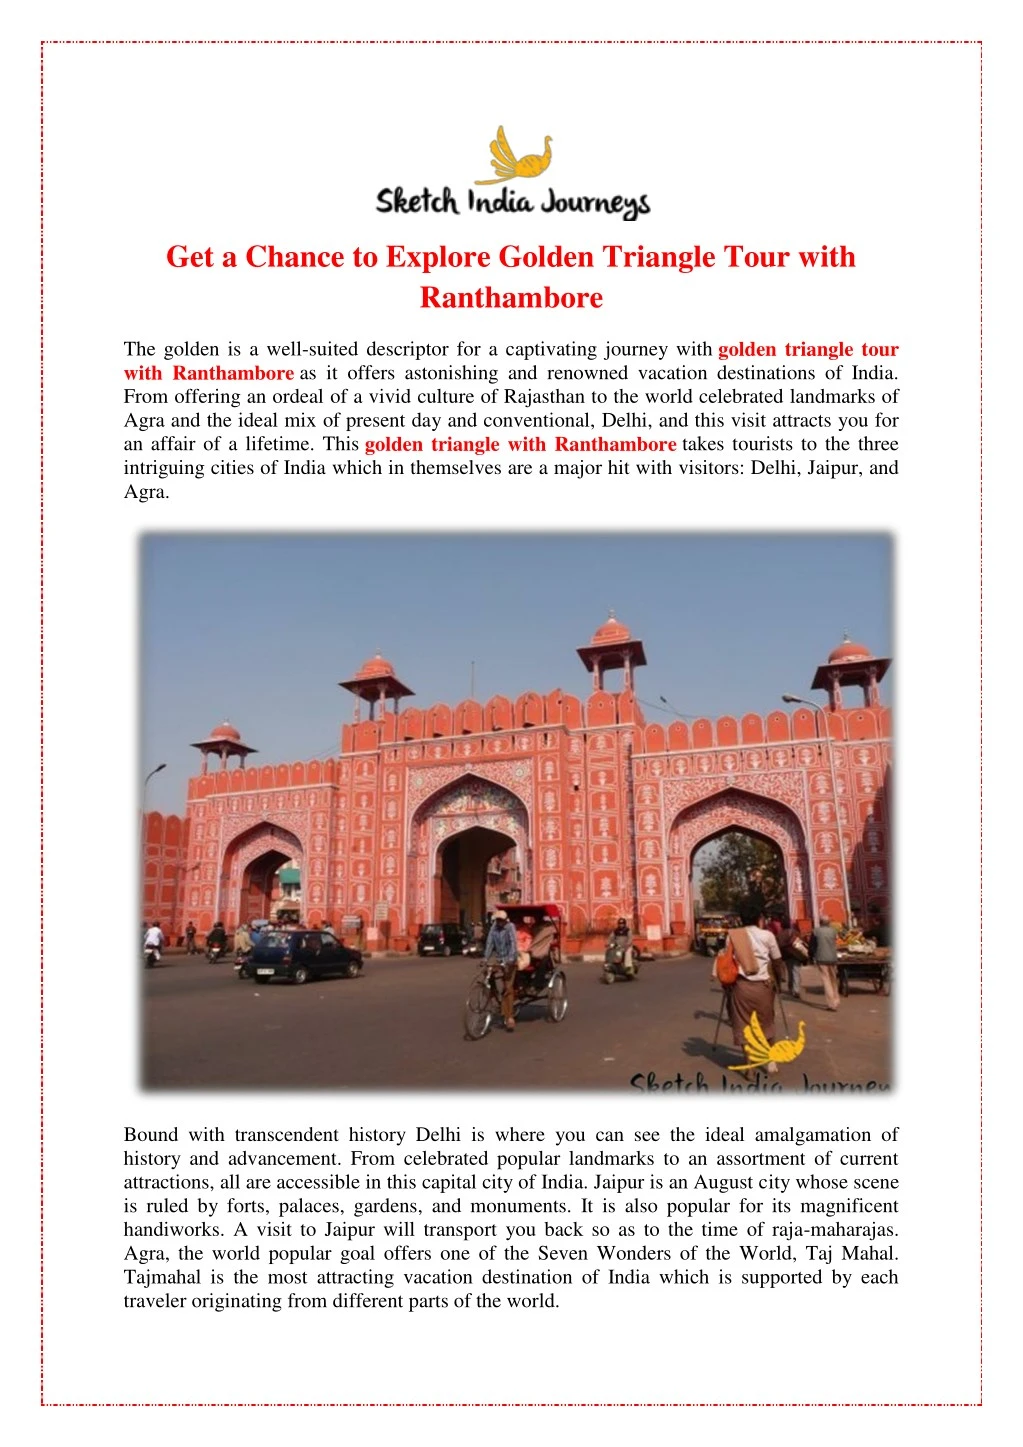 get a chance to explore golden triangle tour with